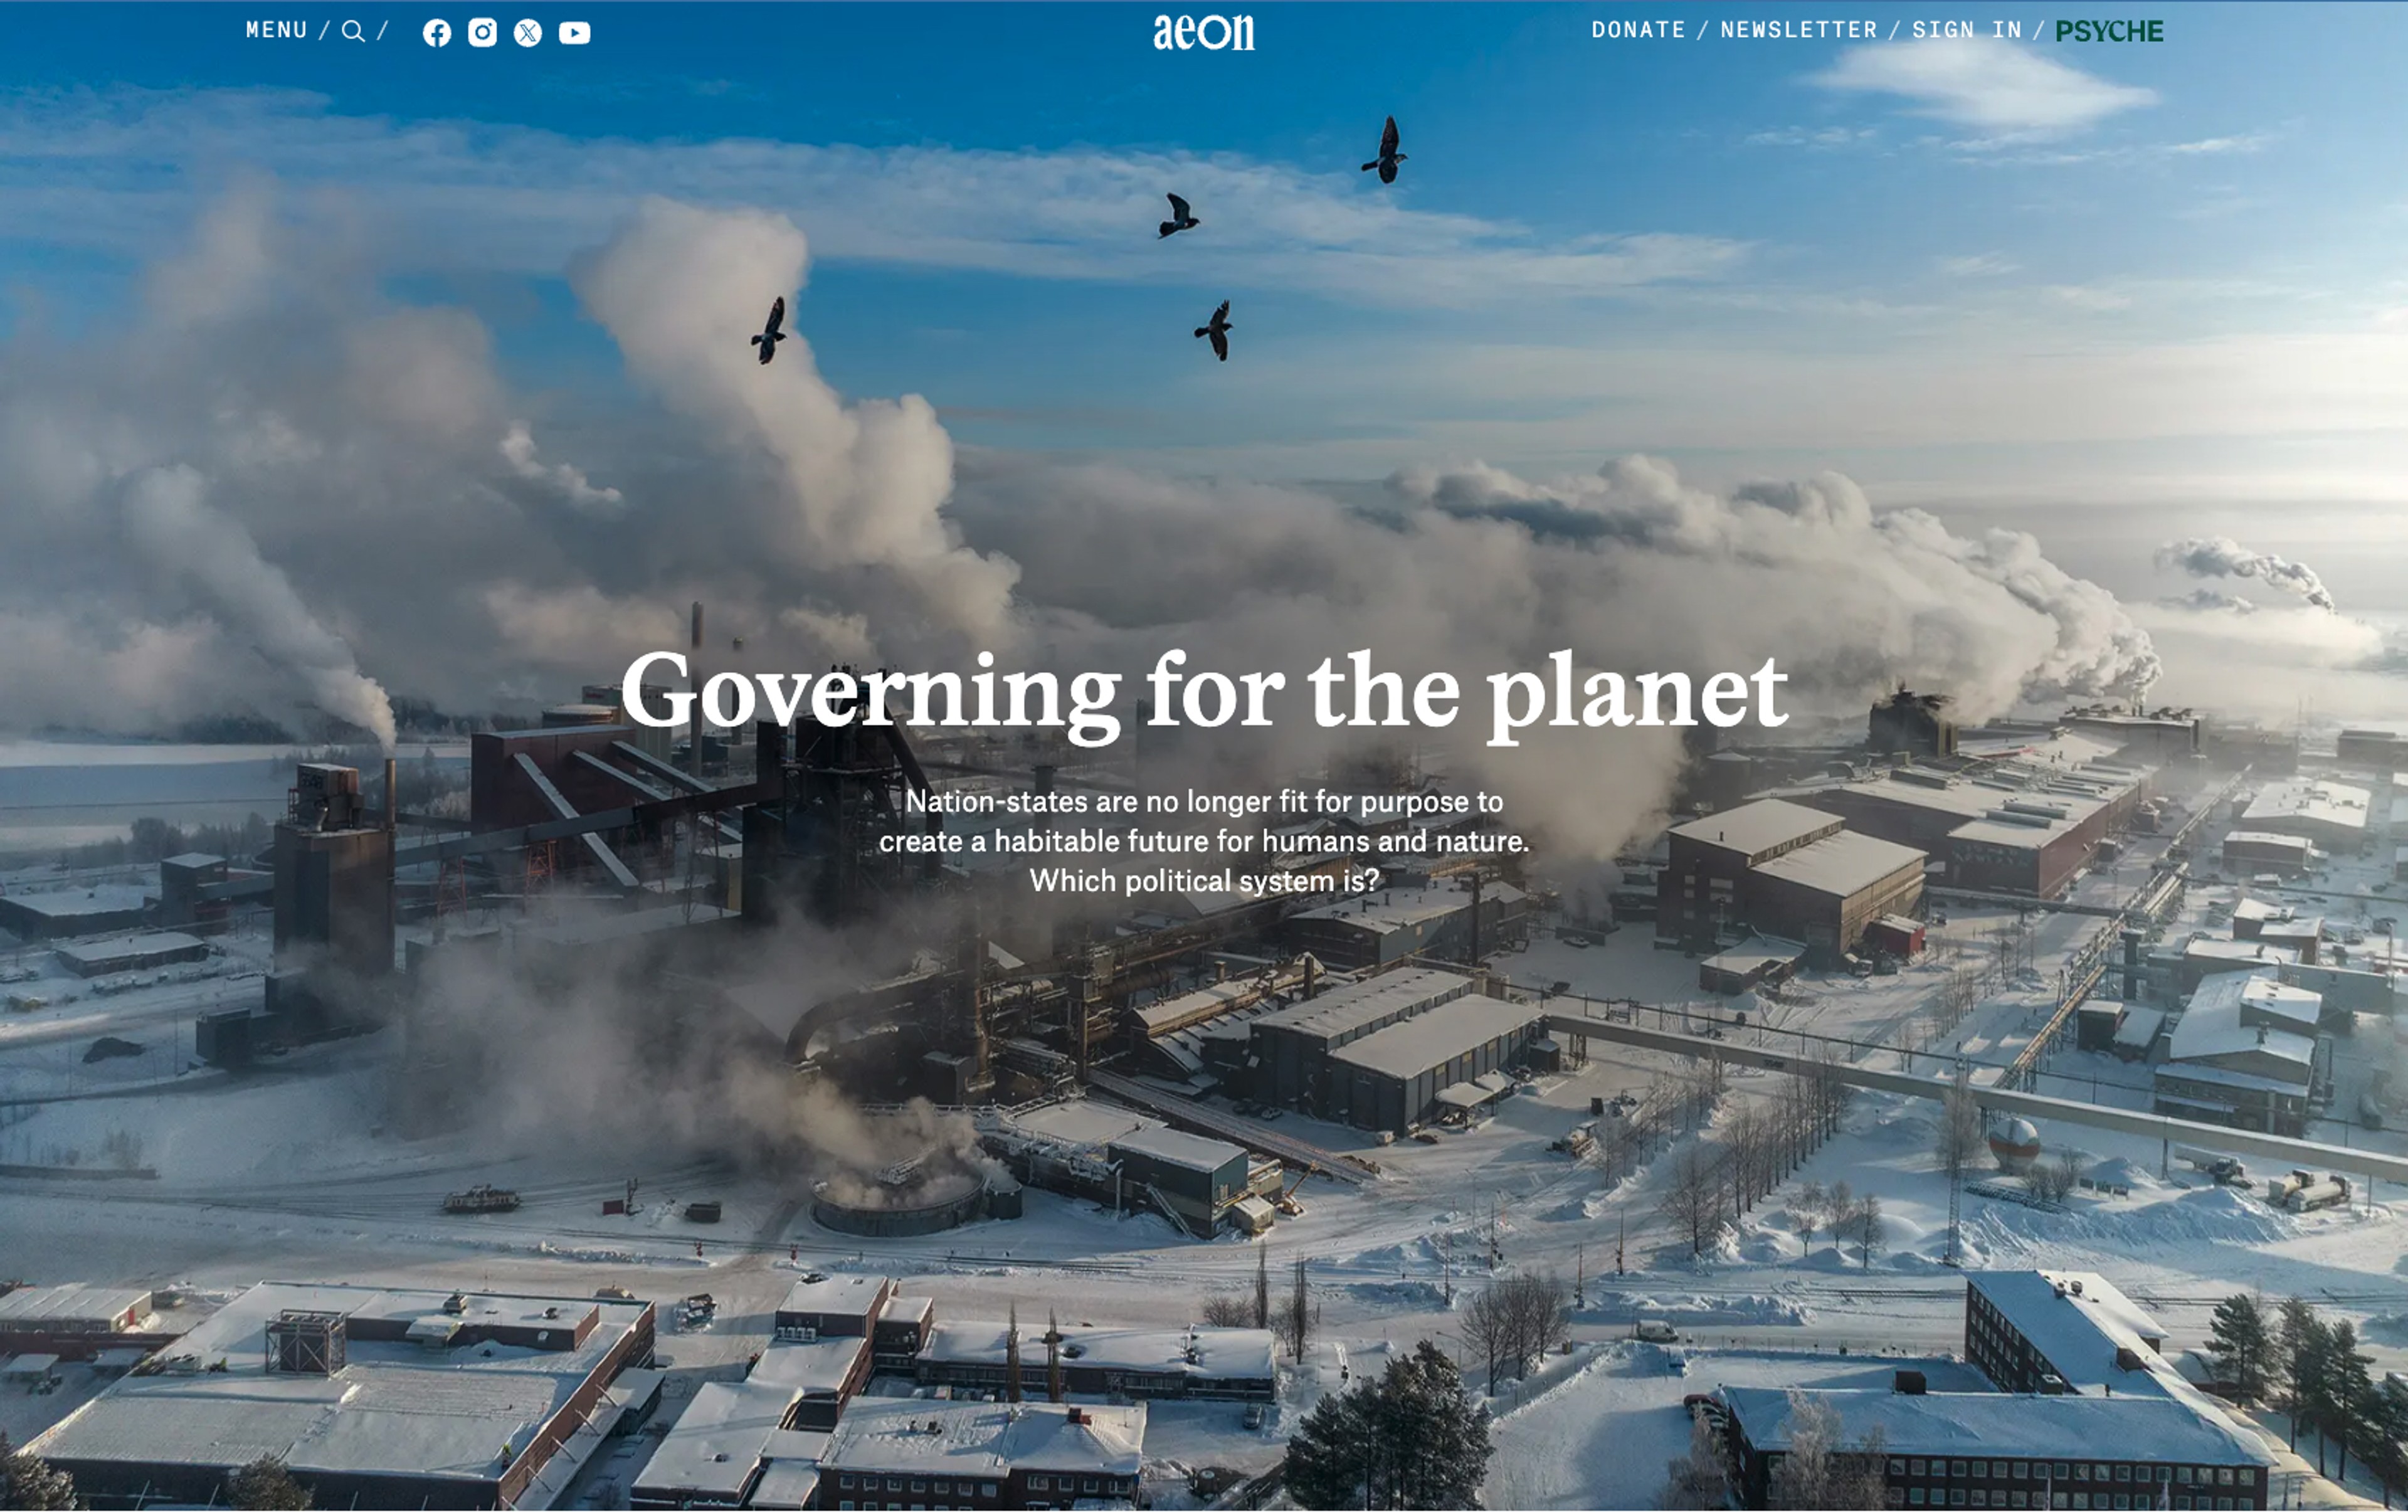 Aeon article "Governing for the planet"